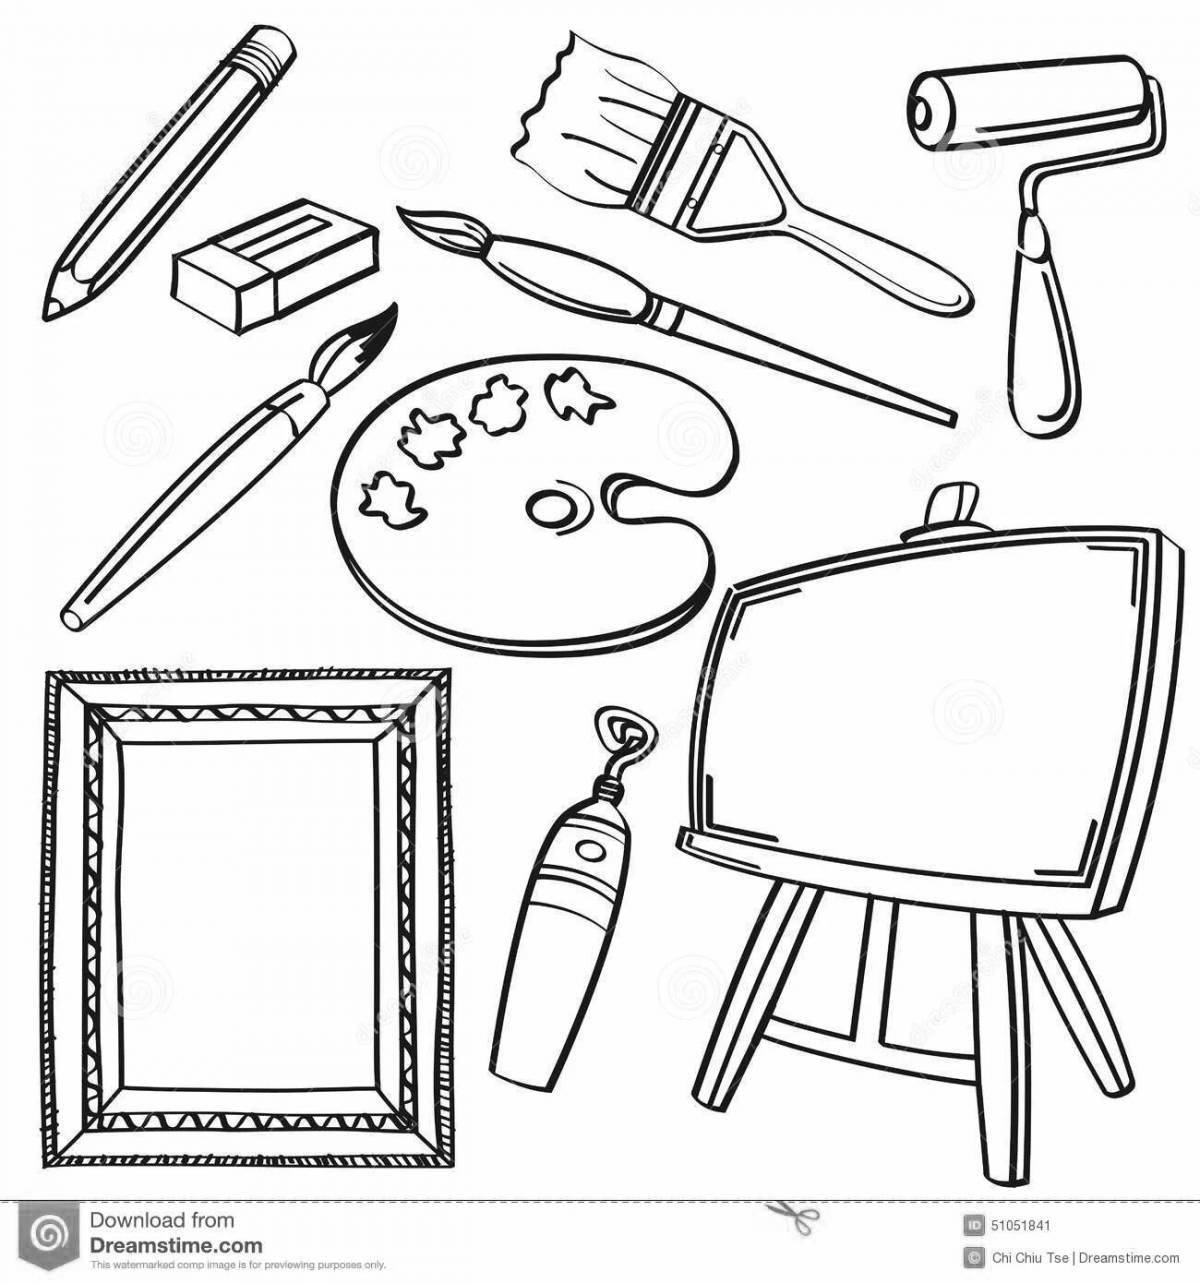 Detailed coloring page of professions and tools